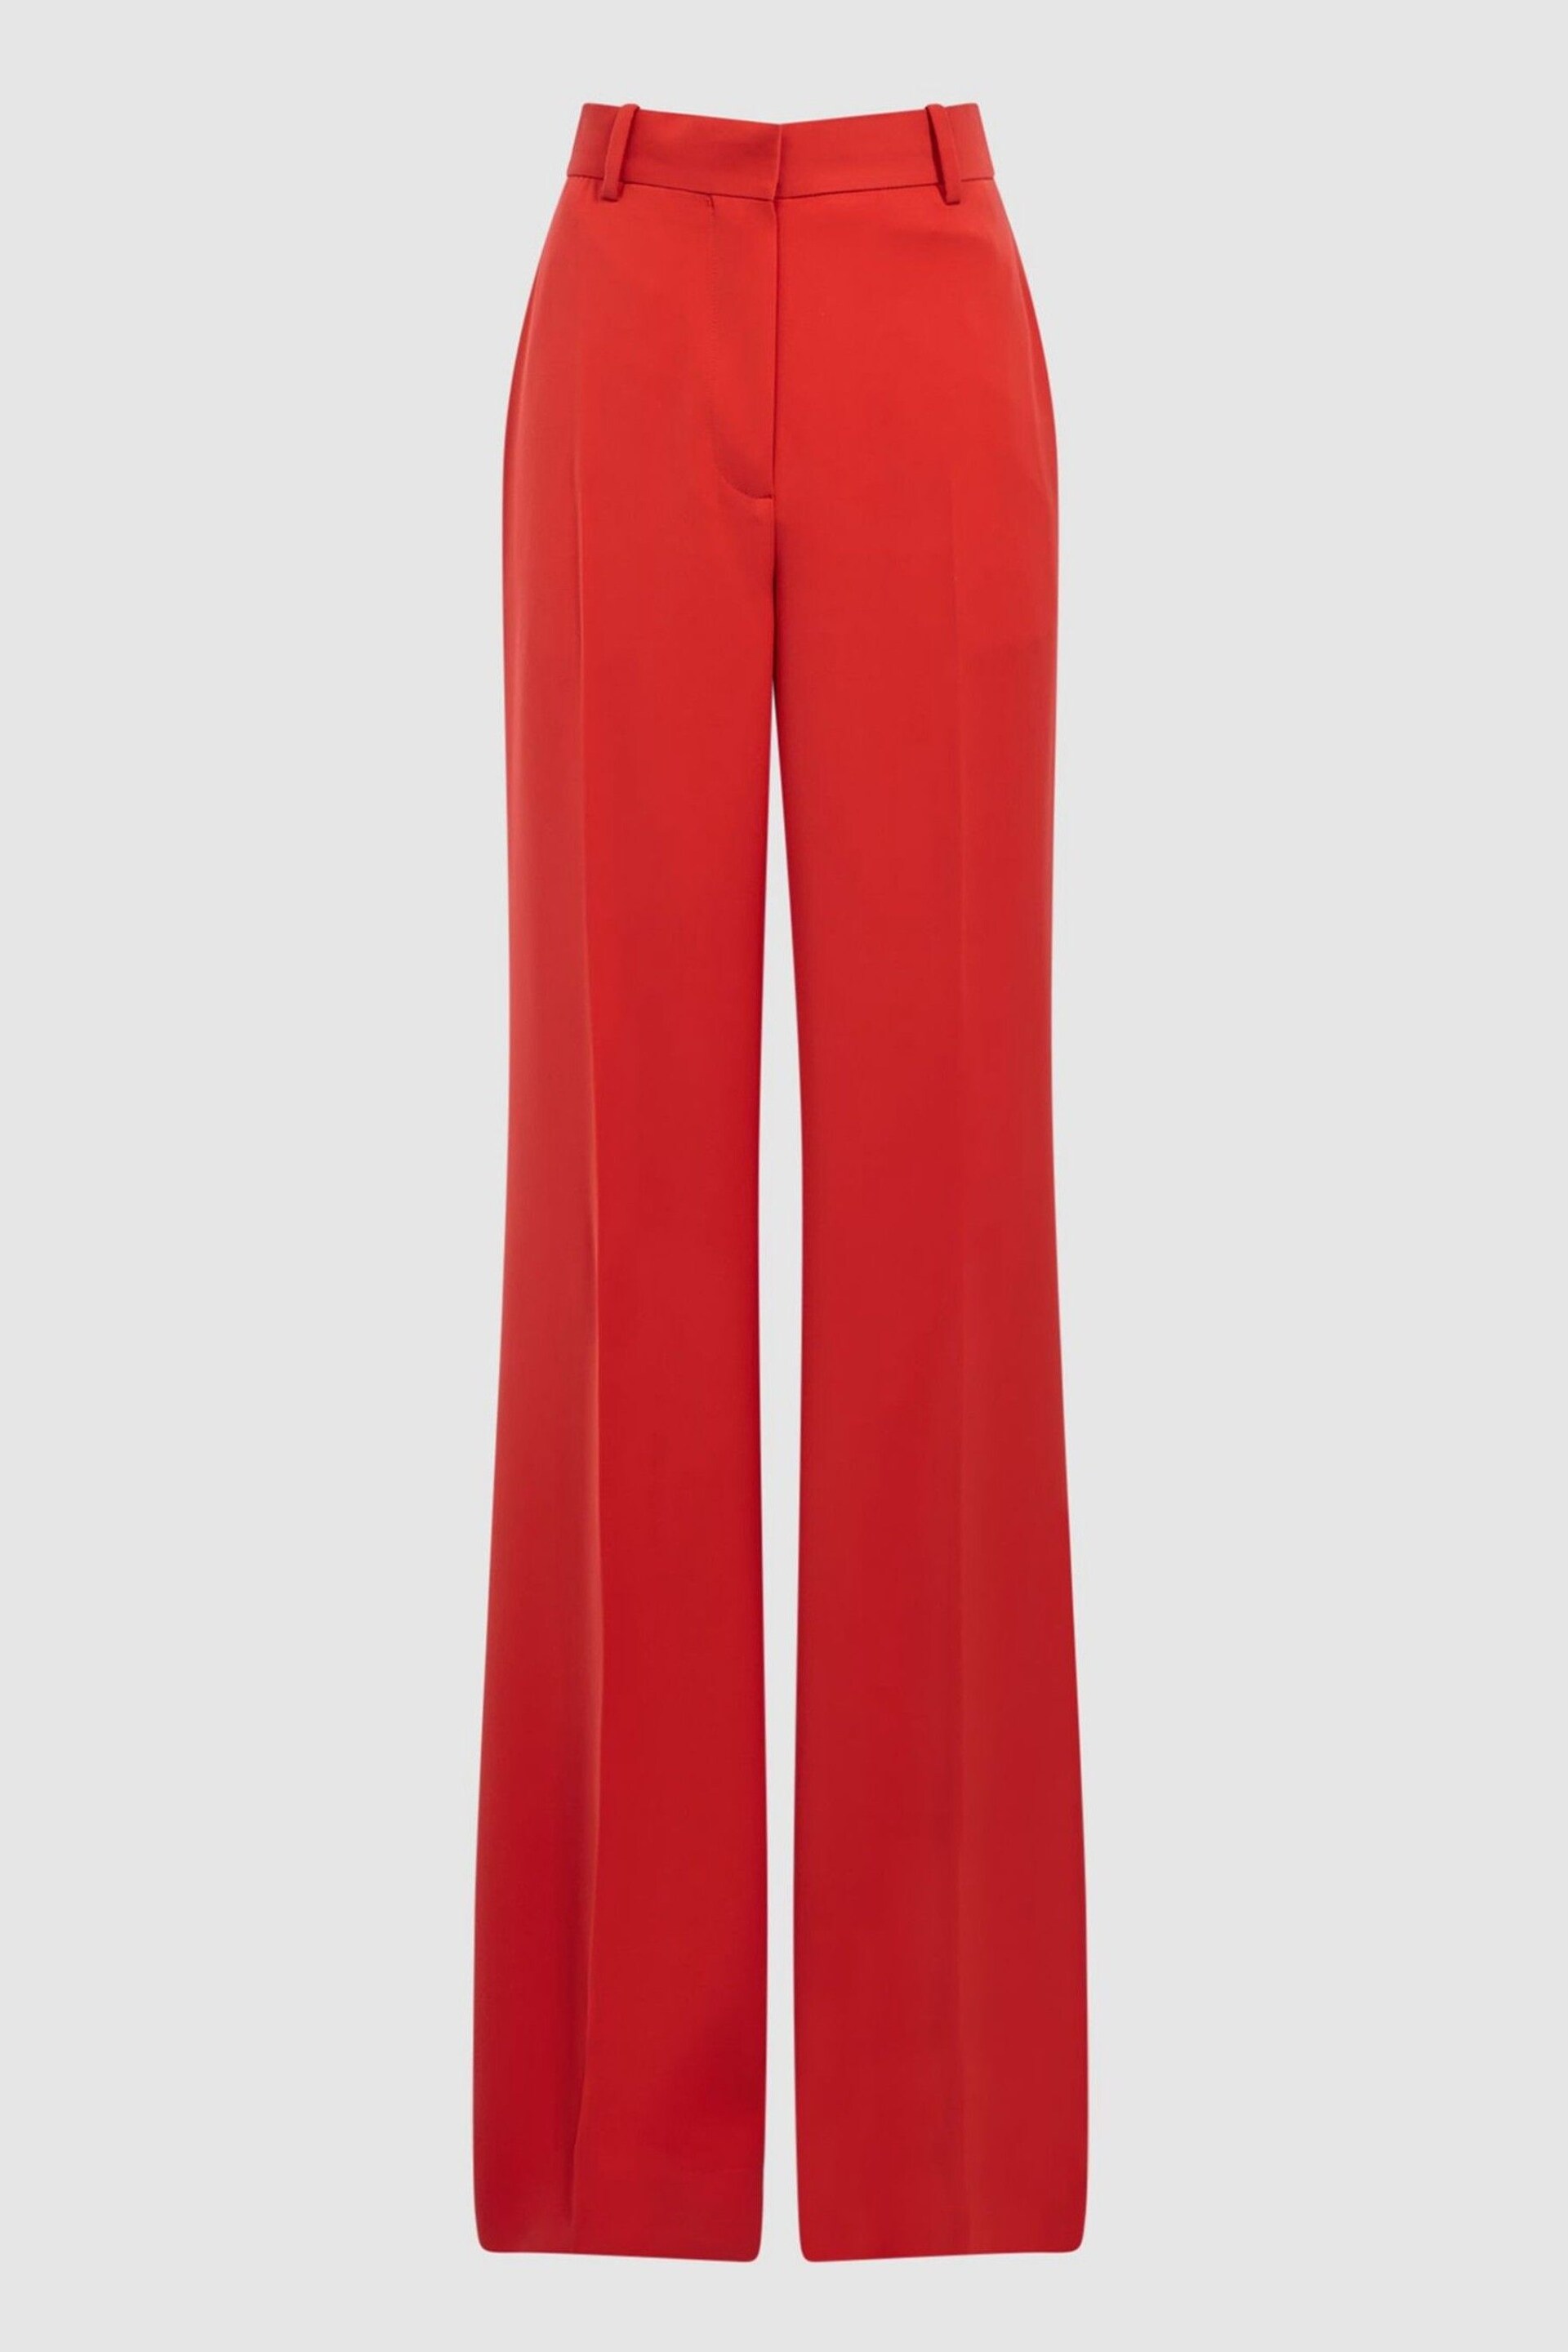 Reiss Coral Maia Wide Leg Trousers - Image 2 of 6